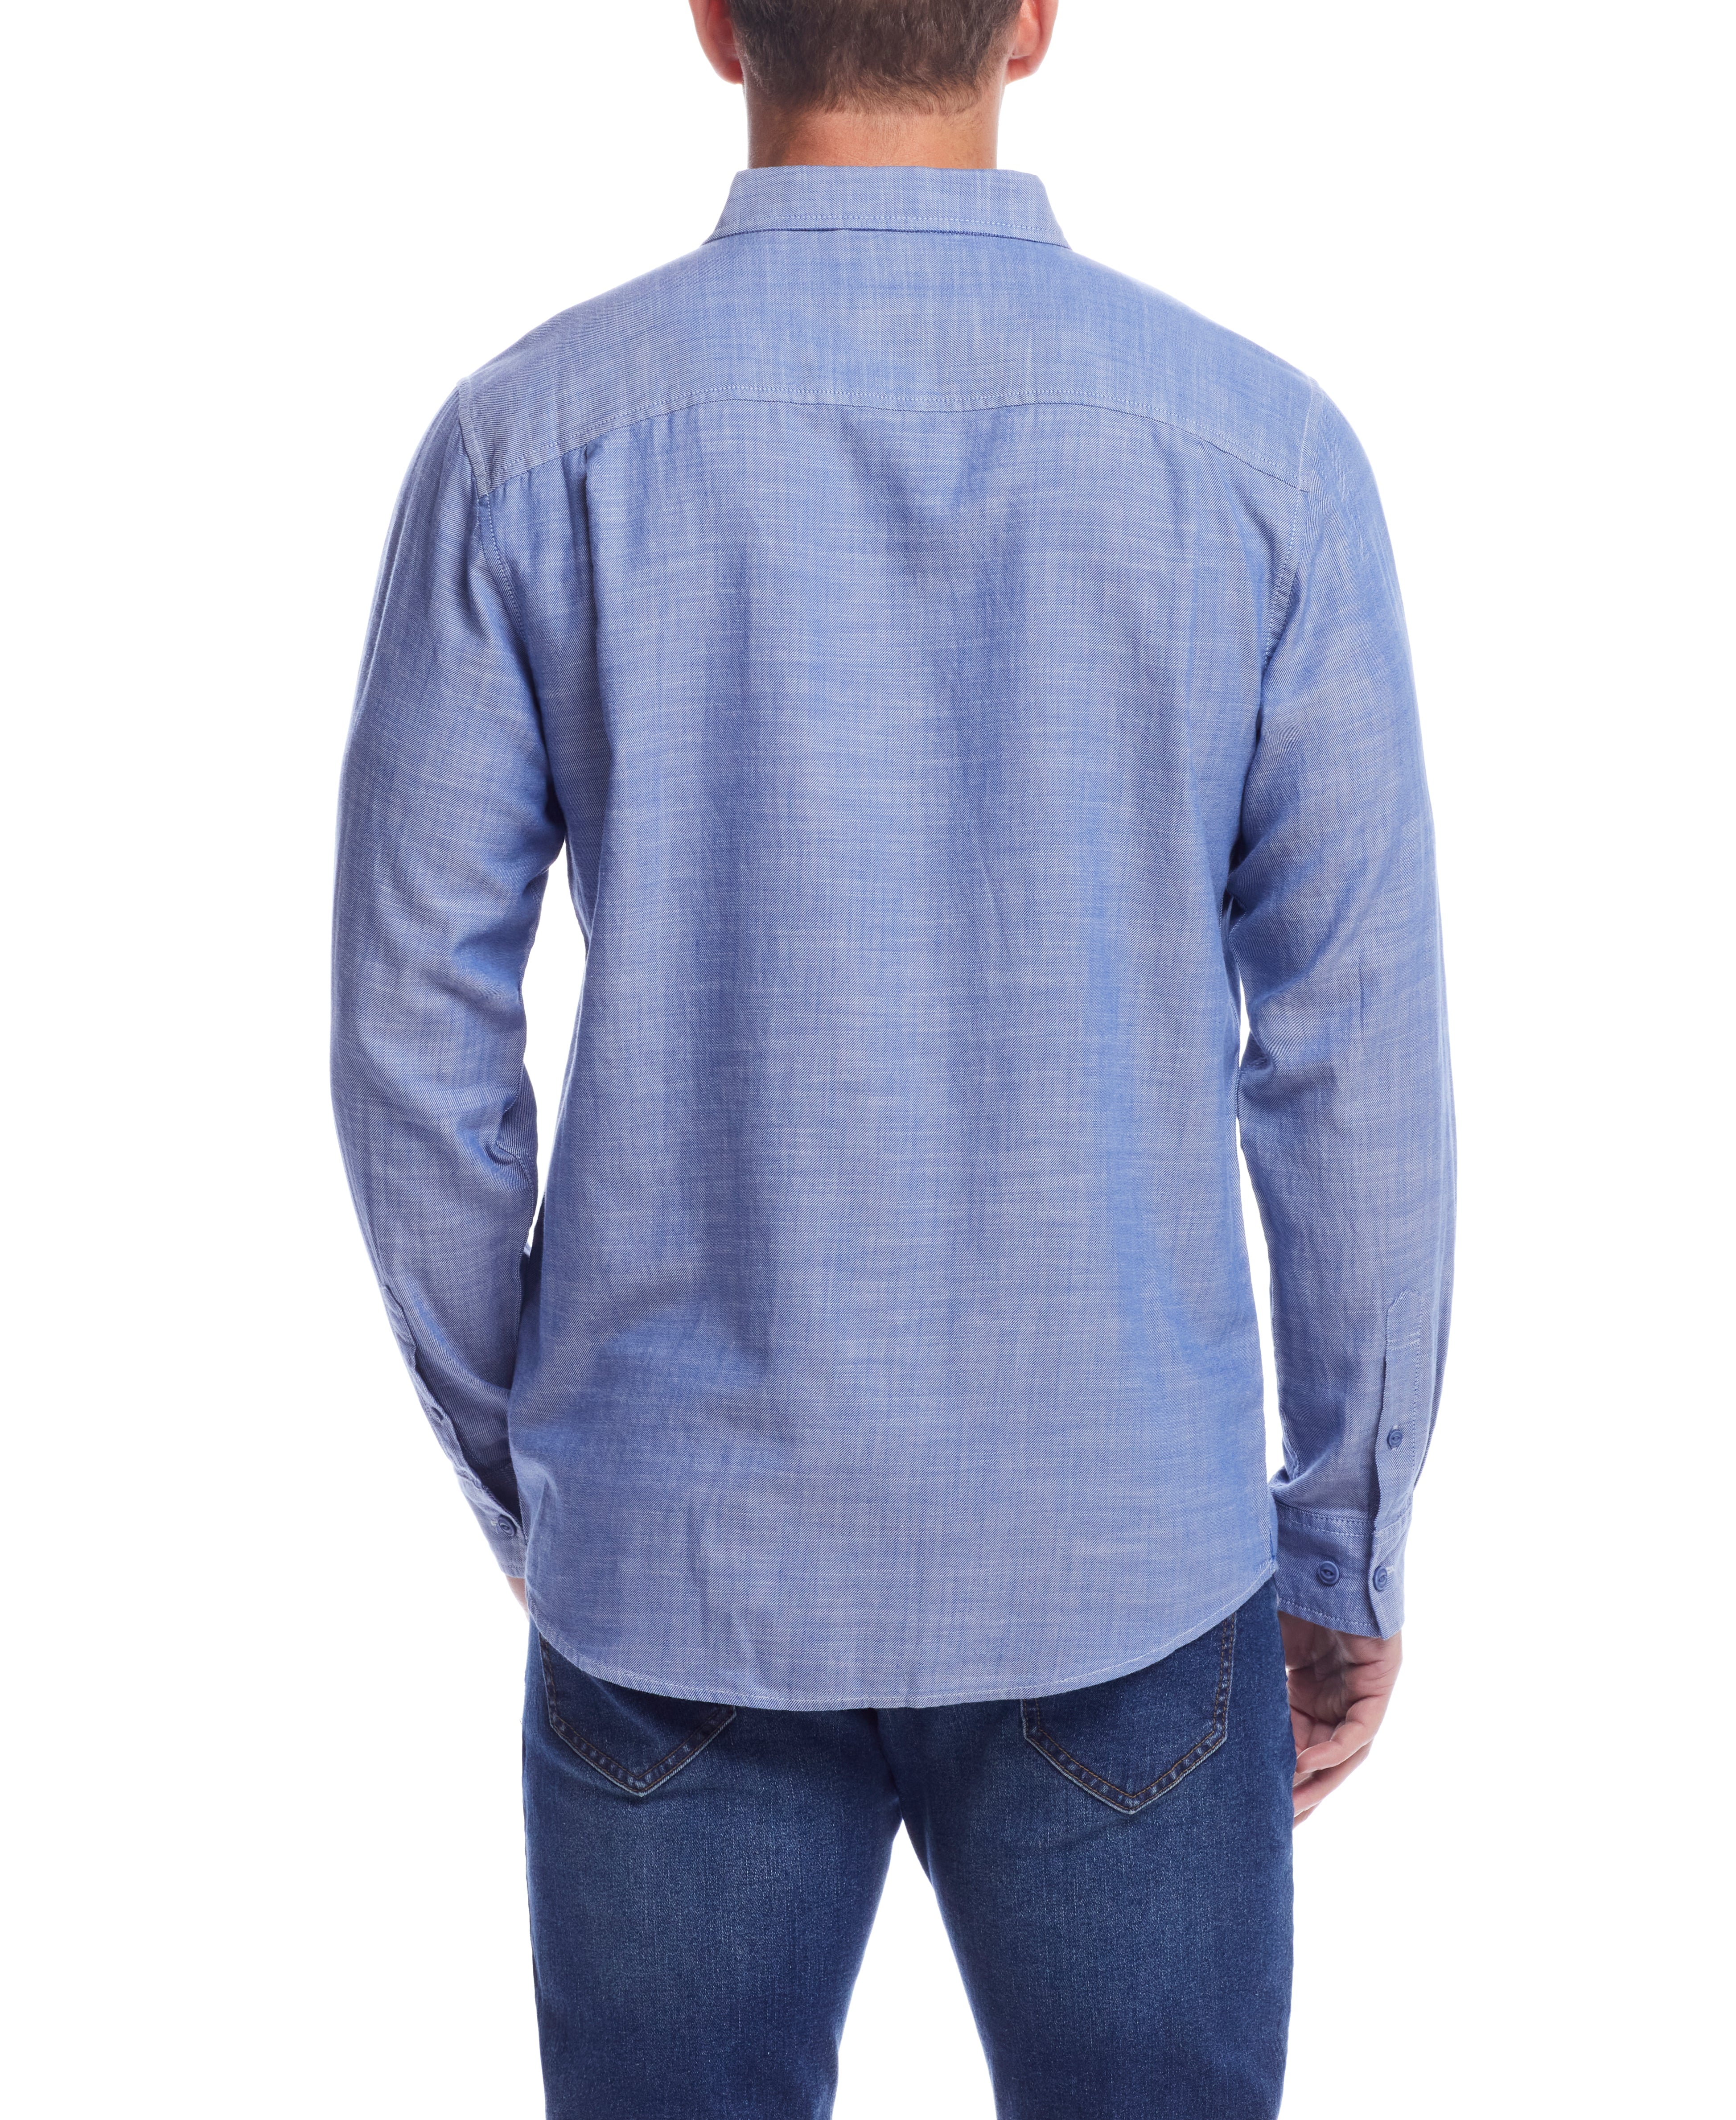 LONG SLEEVE SOLID COTTON TWILL SHIRT in FRENCH NAVY